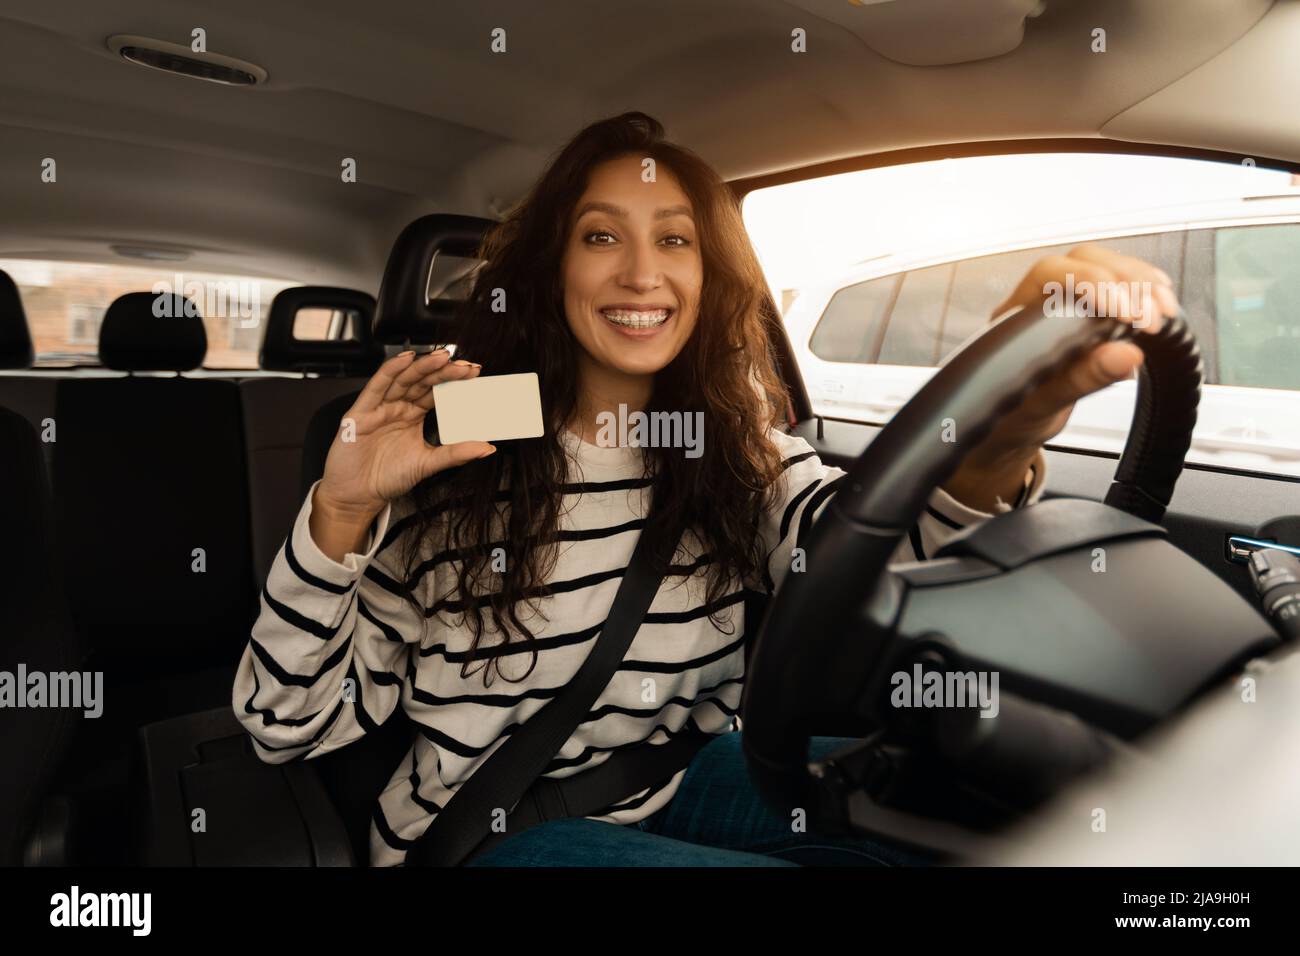 Smiling female driving new car showing driver license Stock Photo